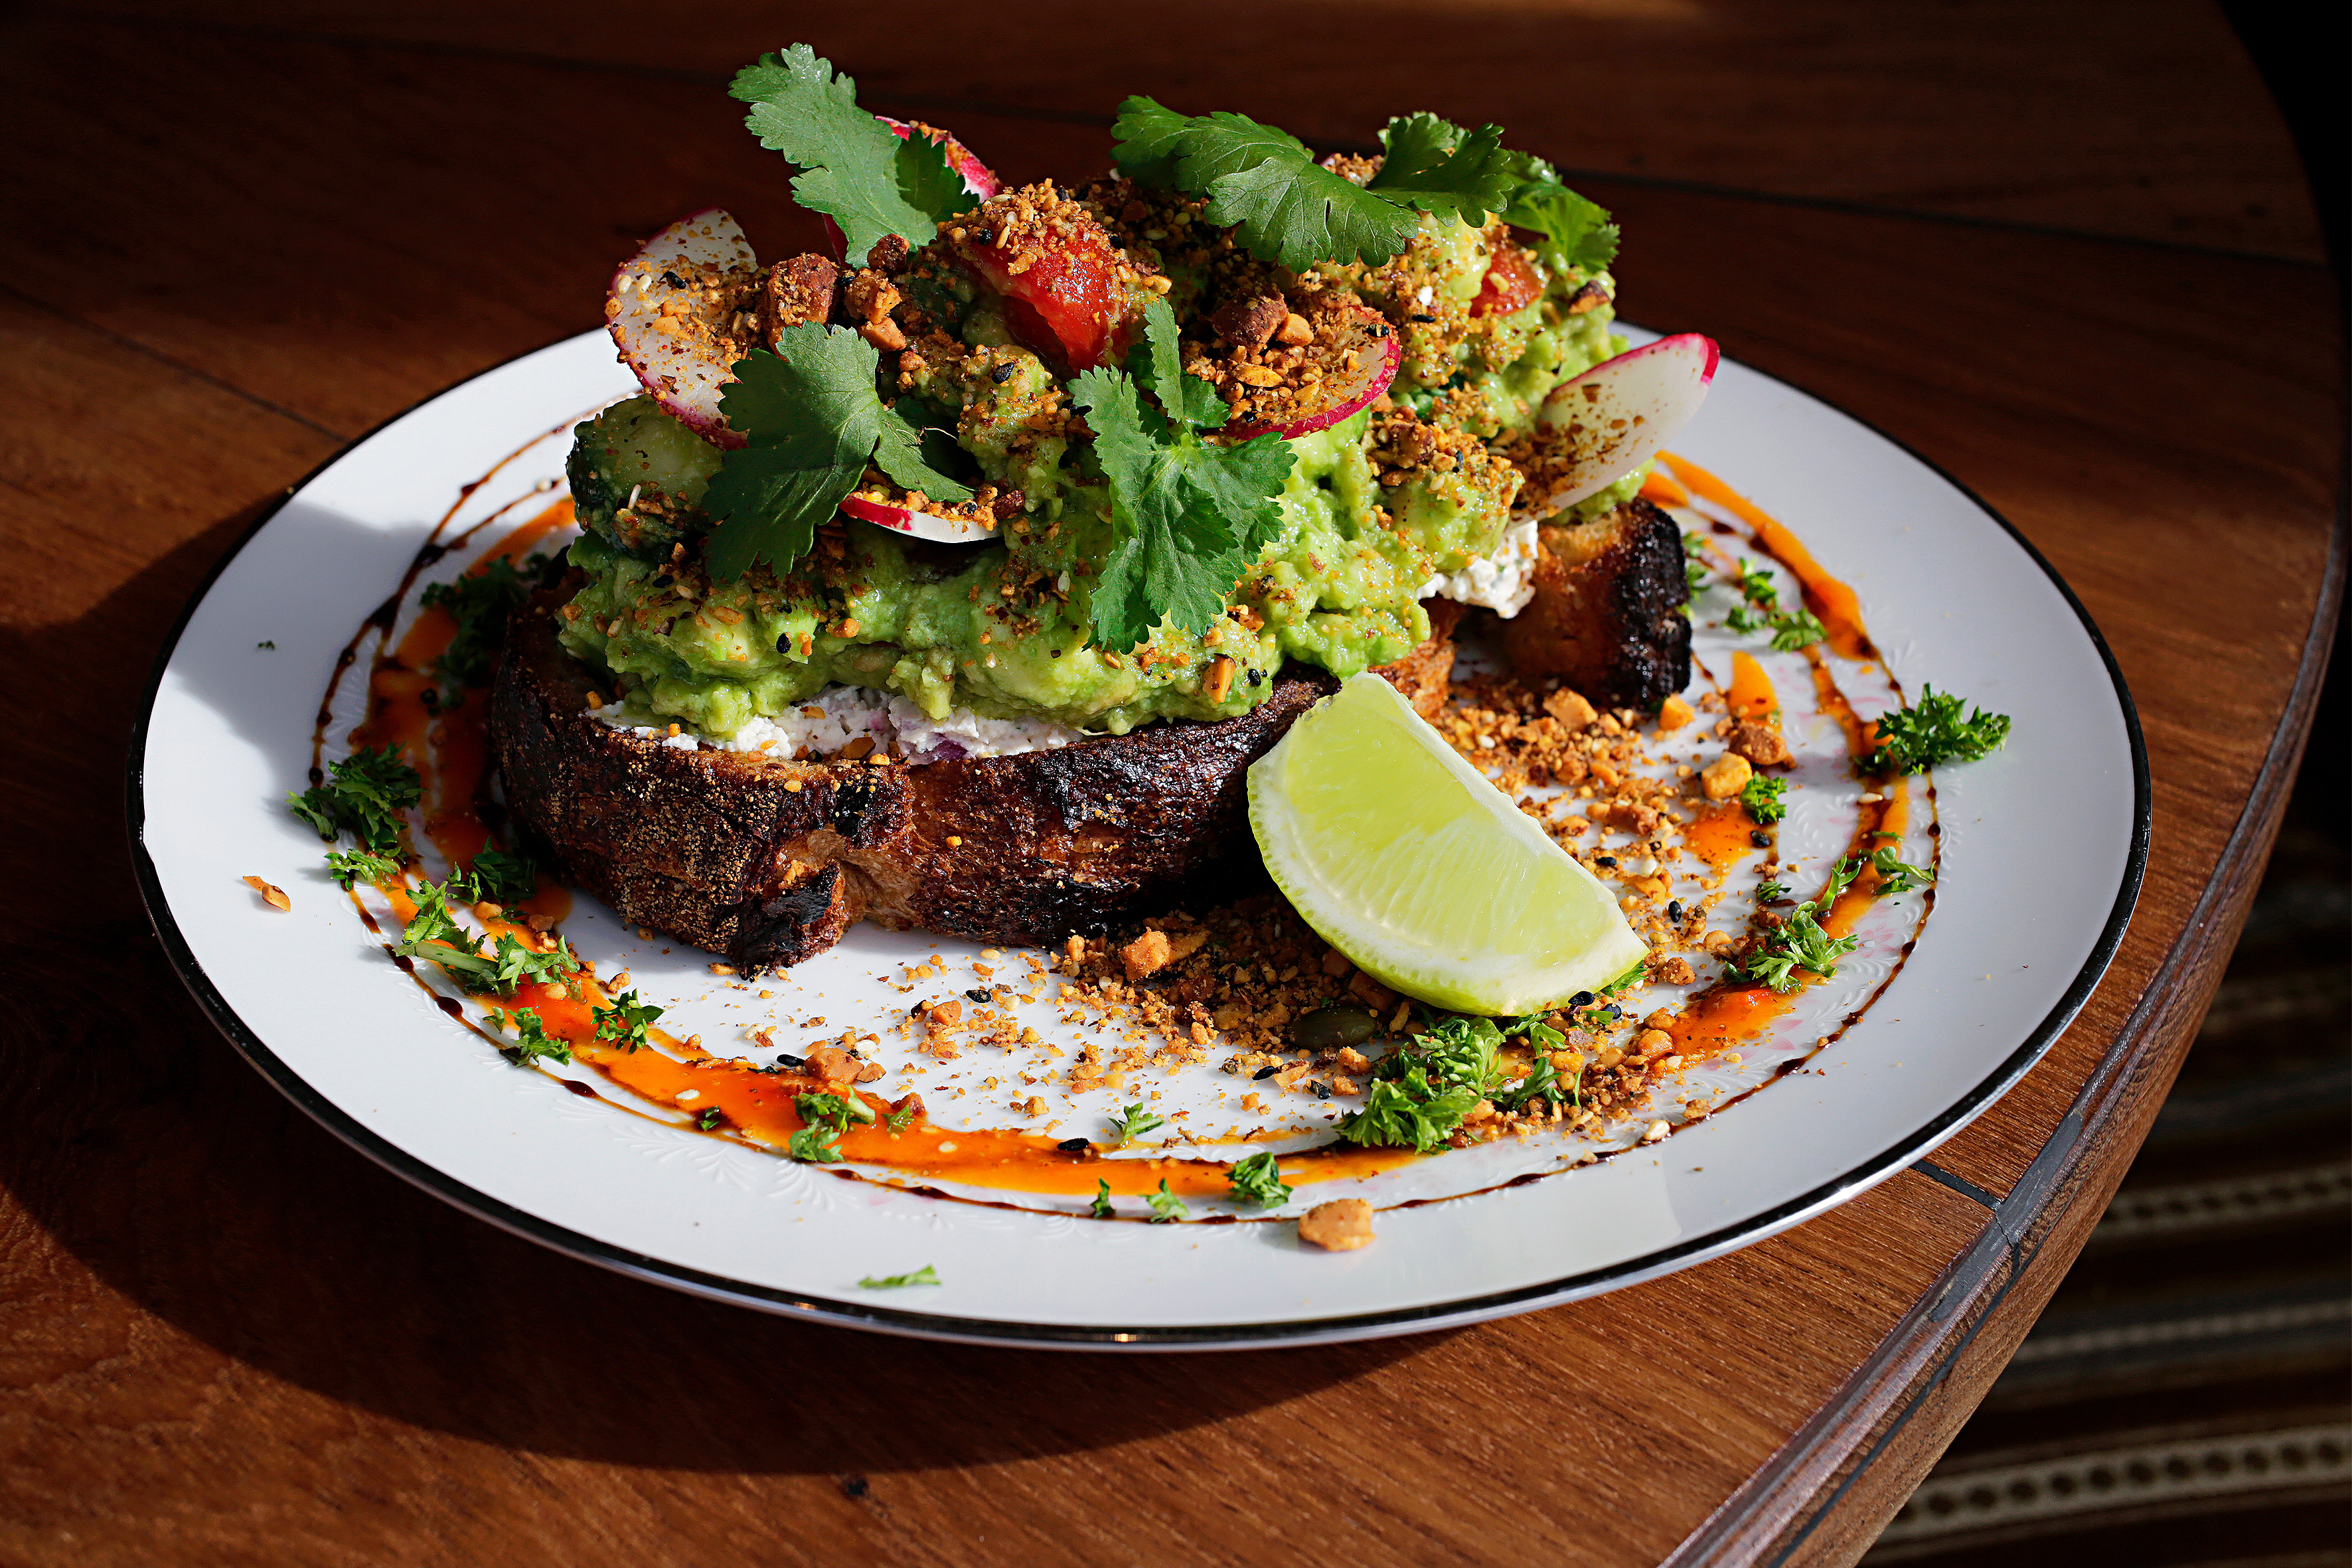 Avo toast from Wards Central Dining cafe in Shenton Park